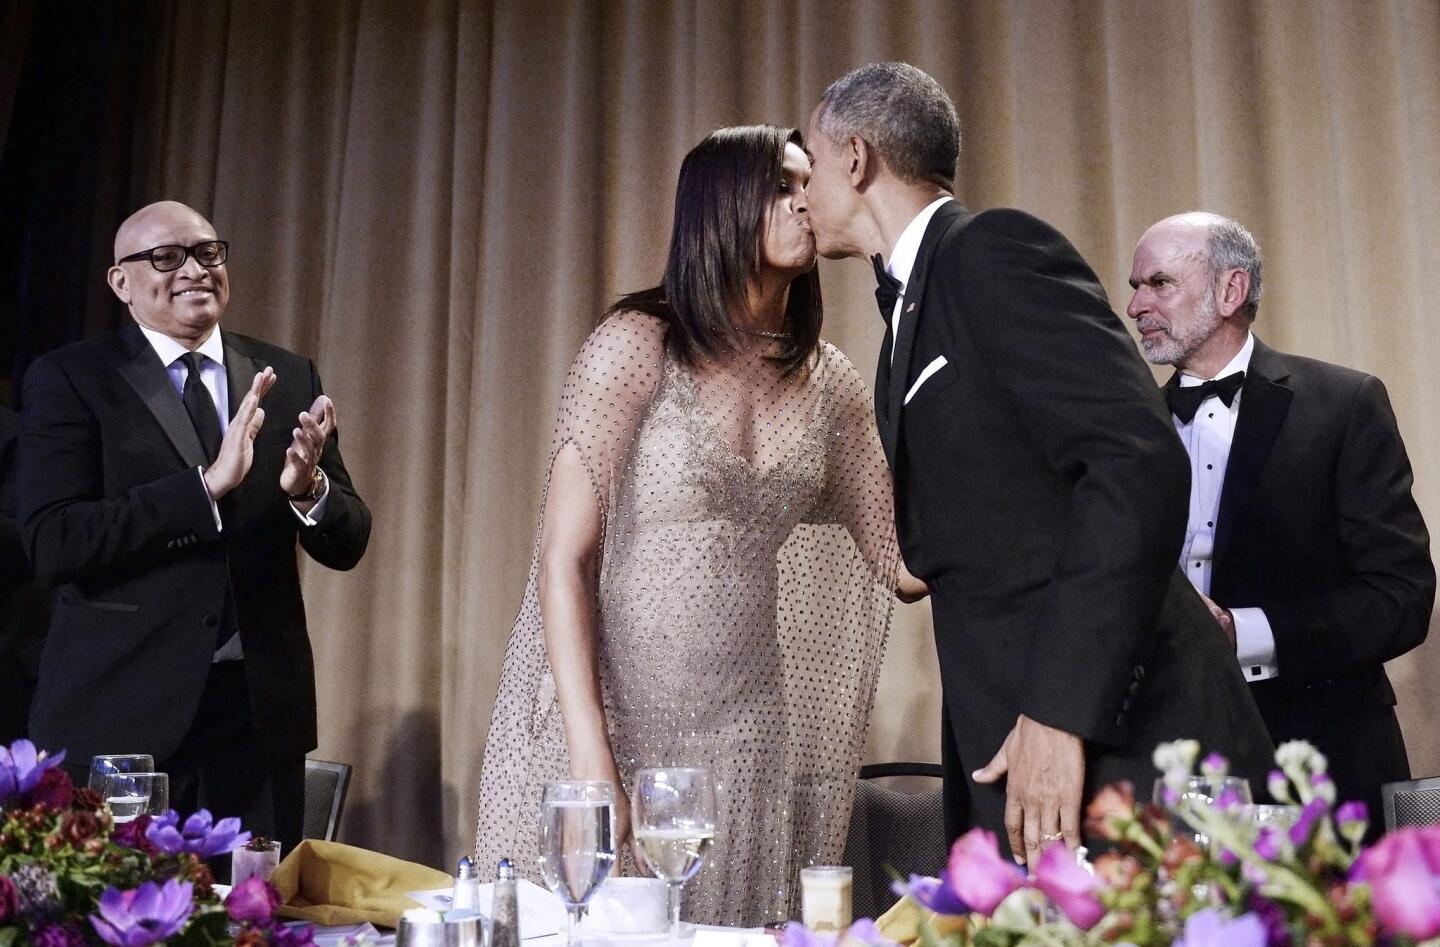 President Obama kisses First Lady Michelle Obama after delivering a speech as host-comedian Larry Wilmore, left, applauds during the White House Correspondents' Association dinner.